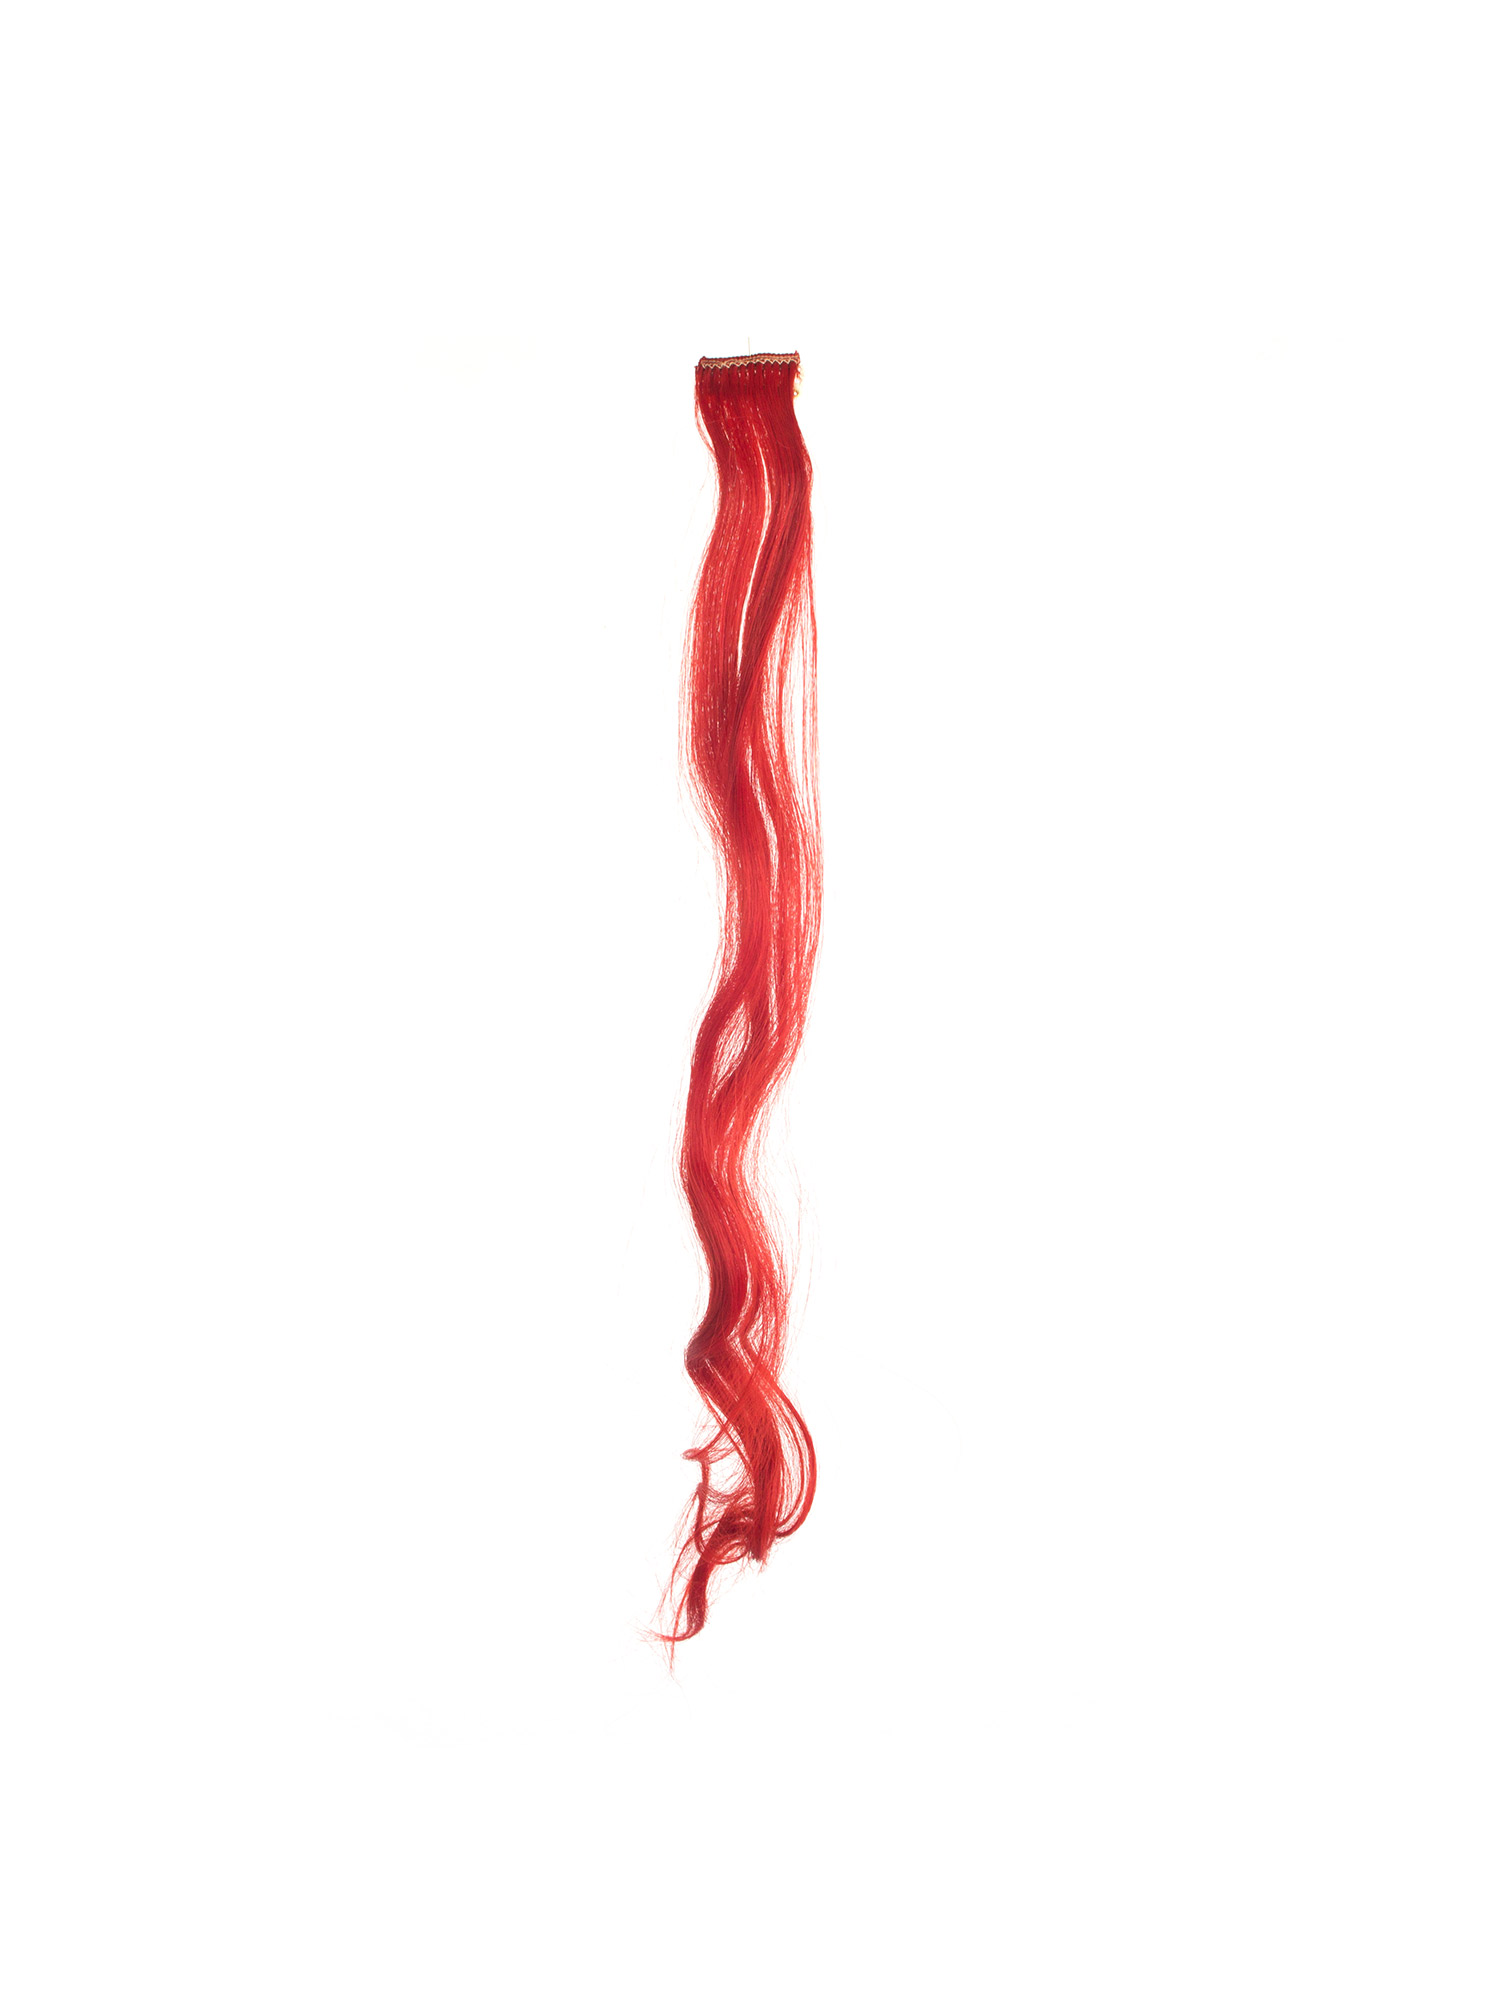 LELINTA Clip In On Colorful Hair piece Synthetic Curly Silk Soft Hair Extensions Highlight - image 3 of 5